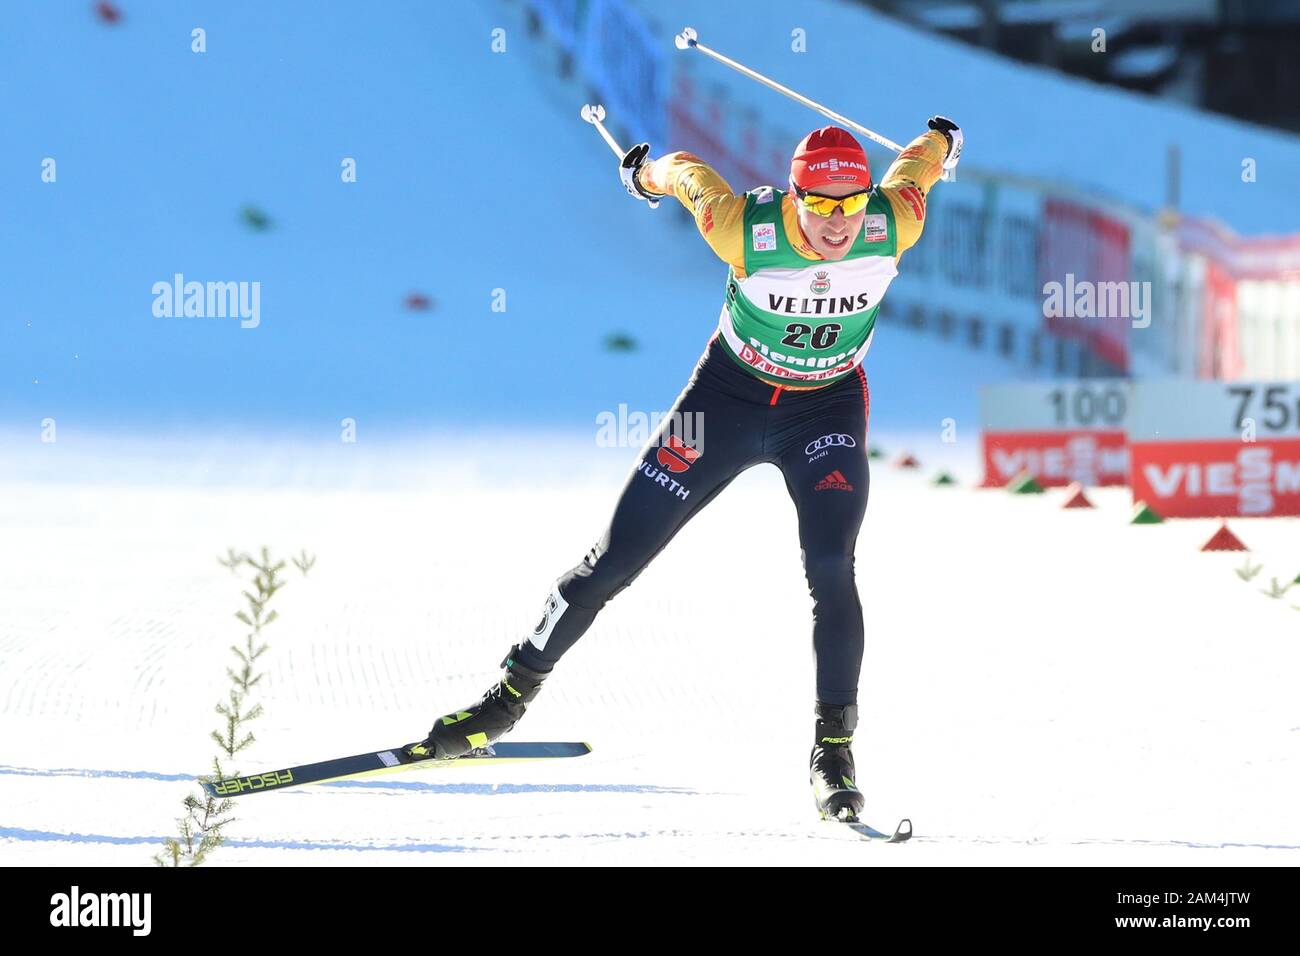 Trento, Italy. 11th January 2020; Lago Di Tesero, Val Di Fiemme, Trento, Italy; International Ski Federation World Cup, FIS Nordic Combined Val Di Fiemme, Eric Frenzel (GER) - Editorial Use Credit: Action Plus Sports Images/Alamy Live News Stock Photo